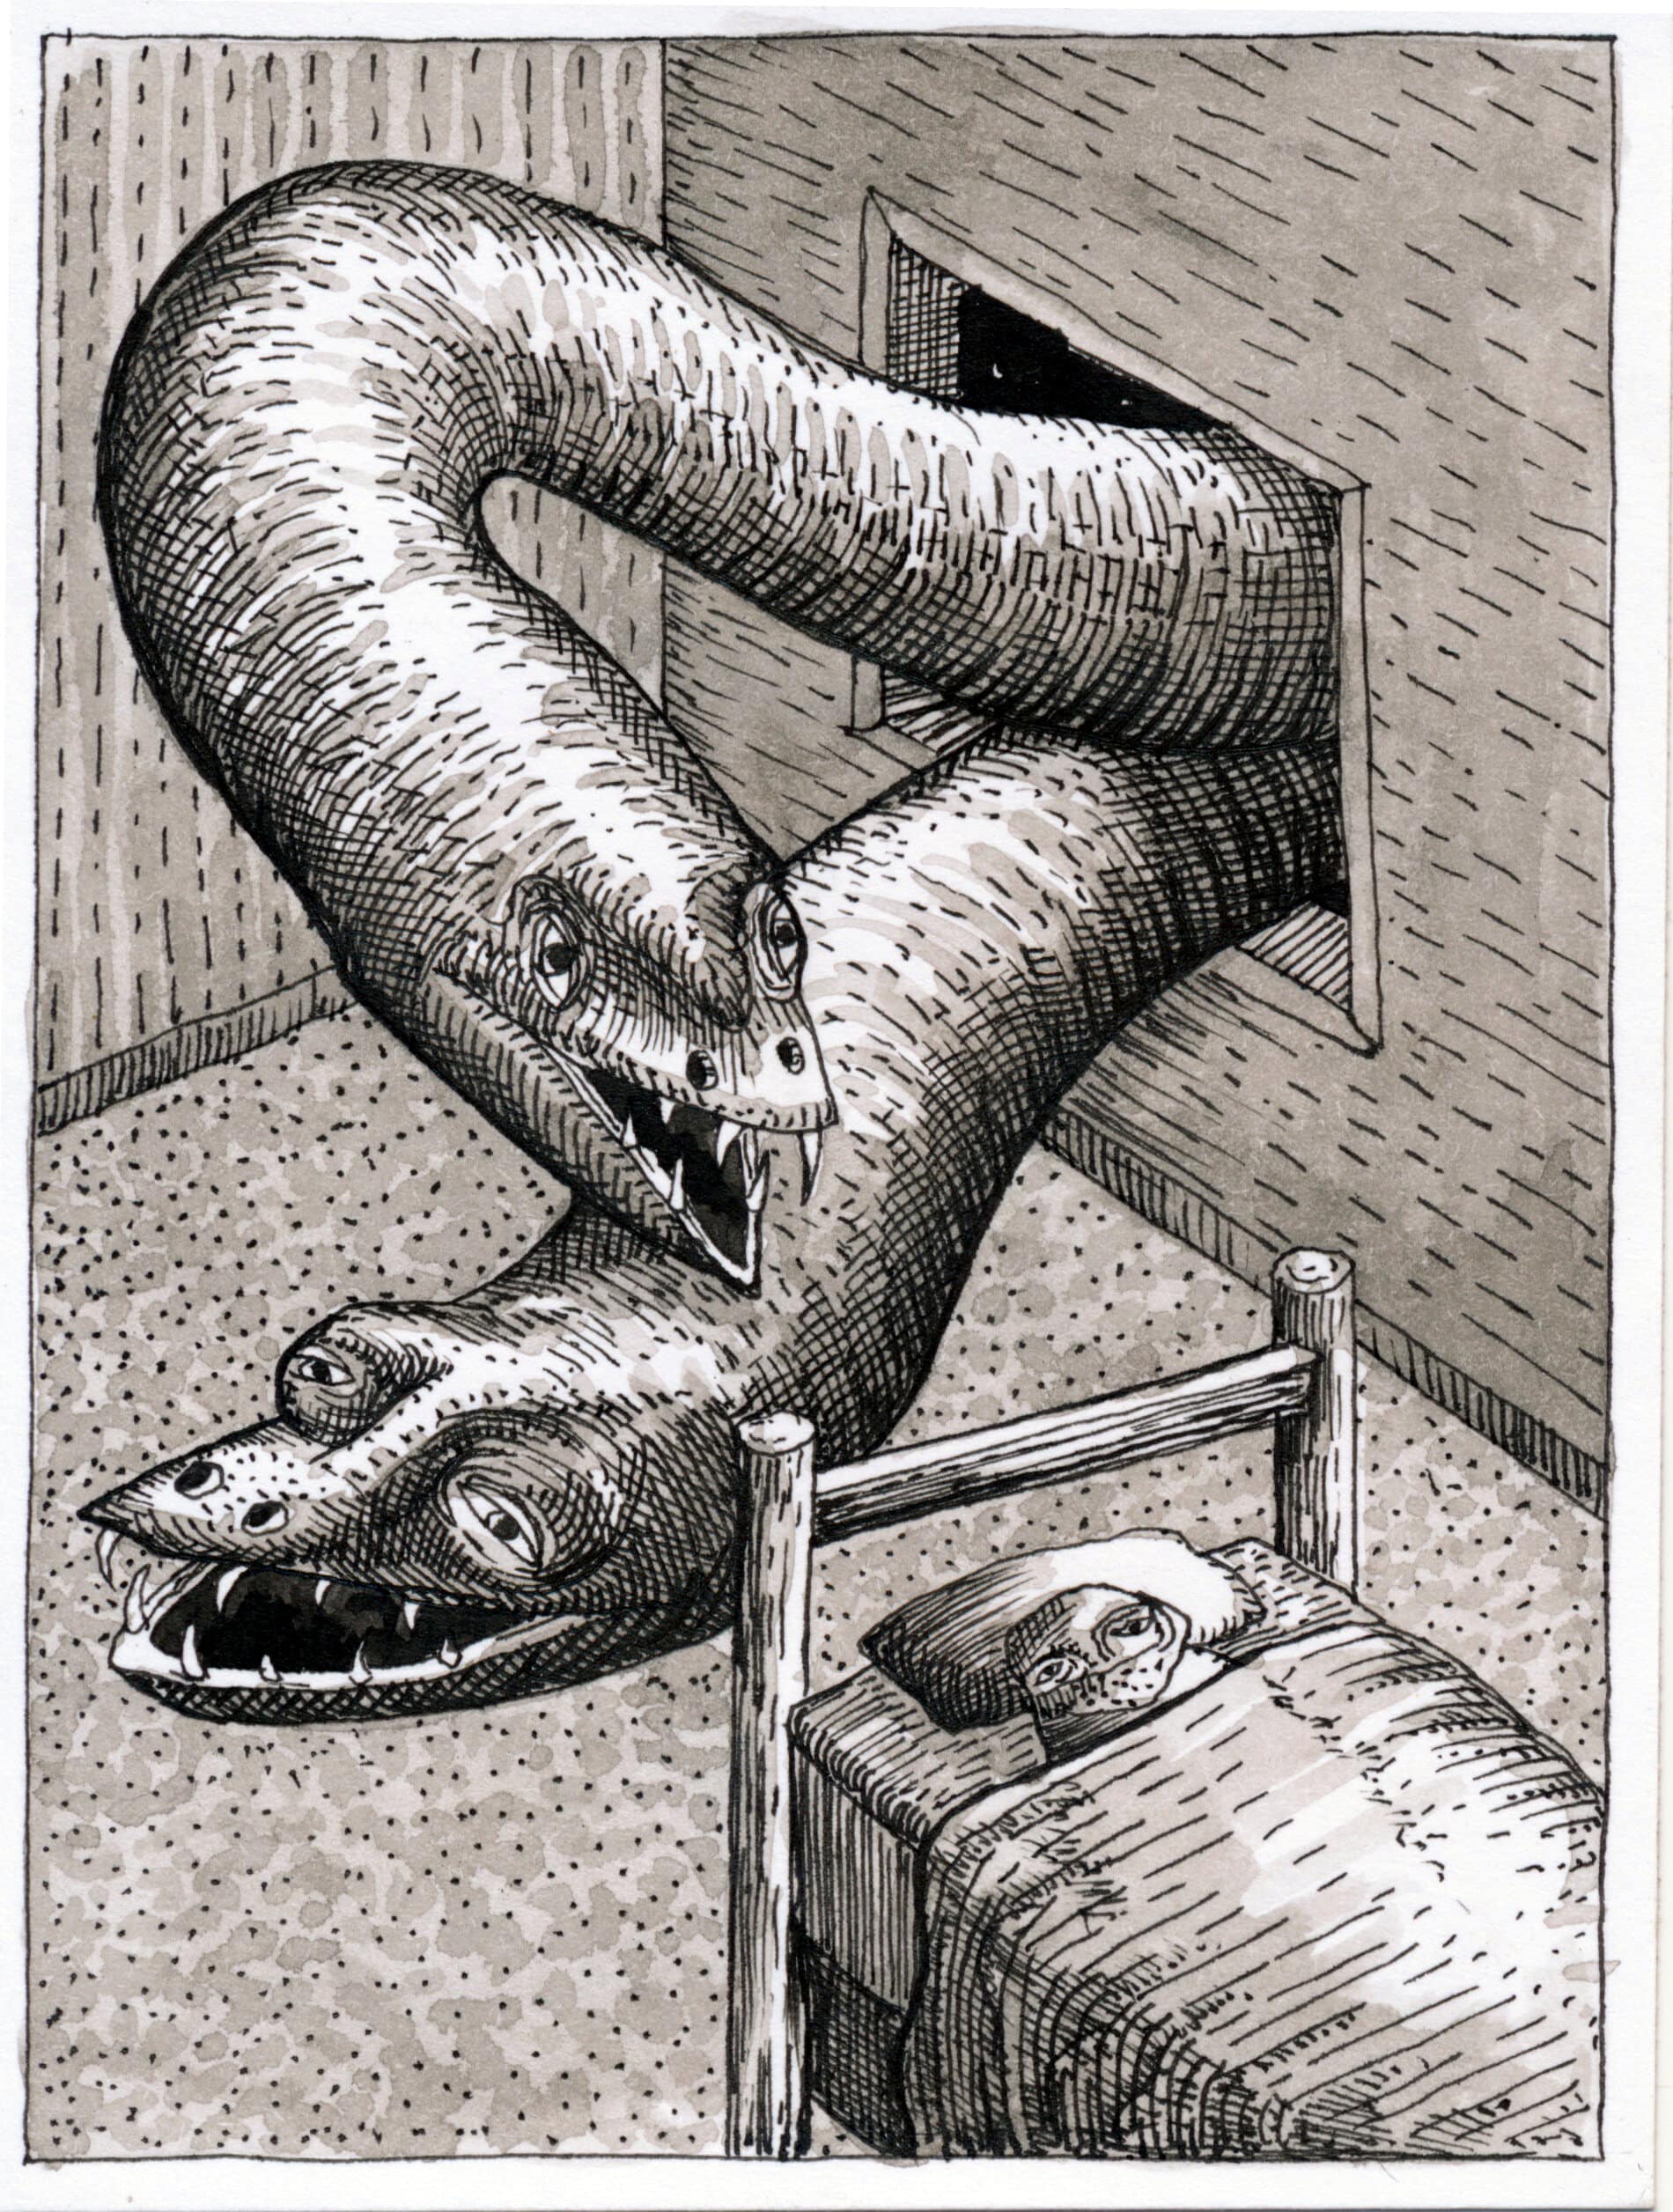 I had a nightmare about huge serpents creeping through open windows (Pandemic Diary series, no. 10) (2020)